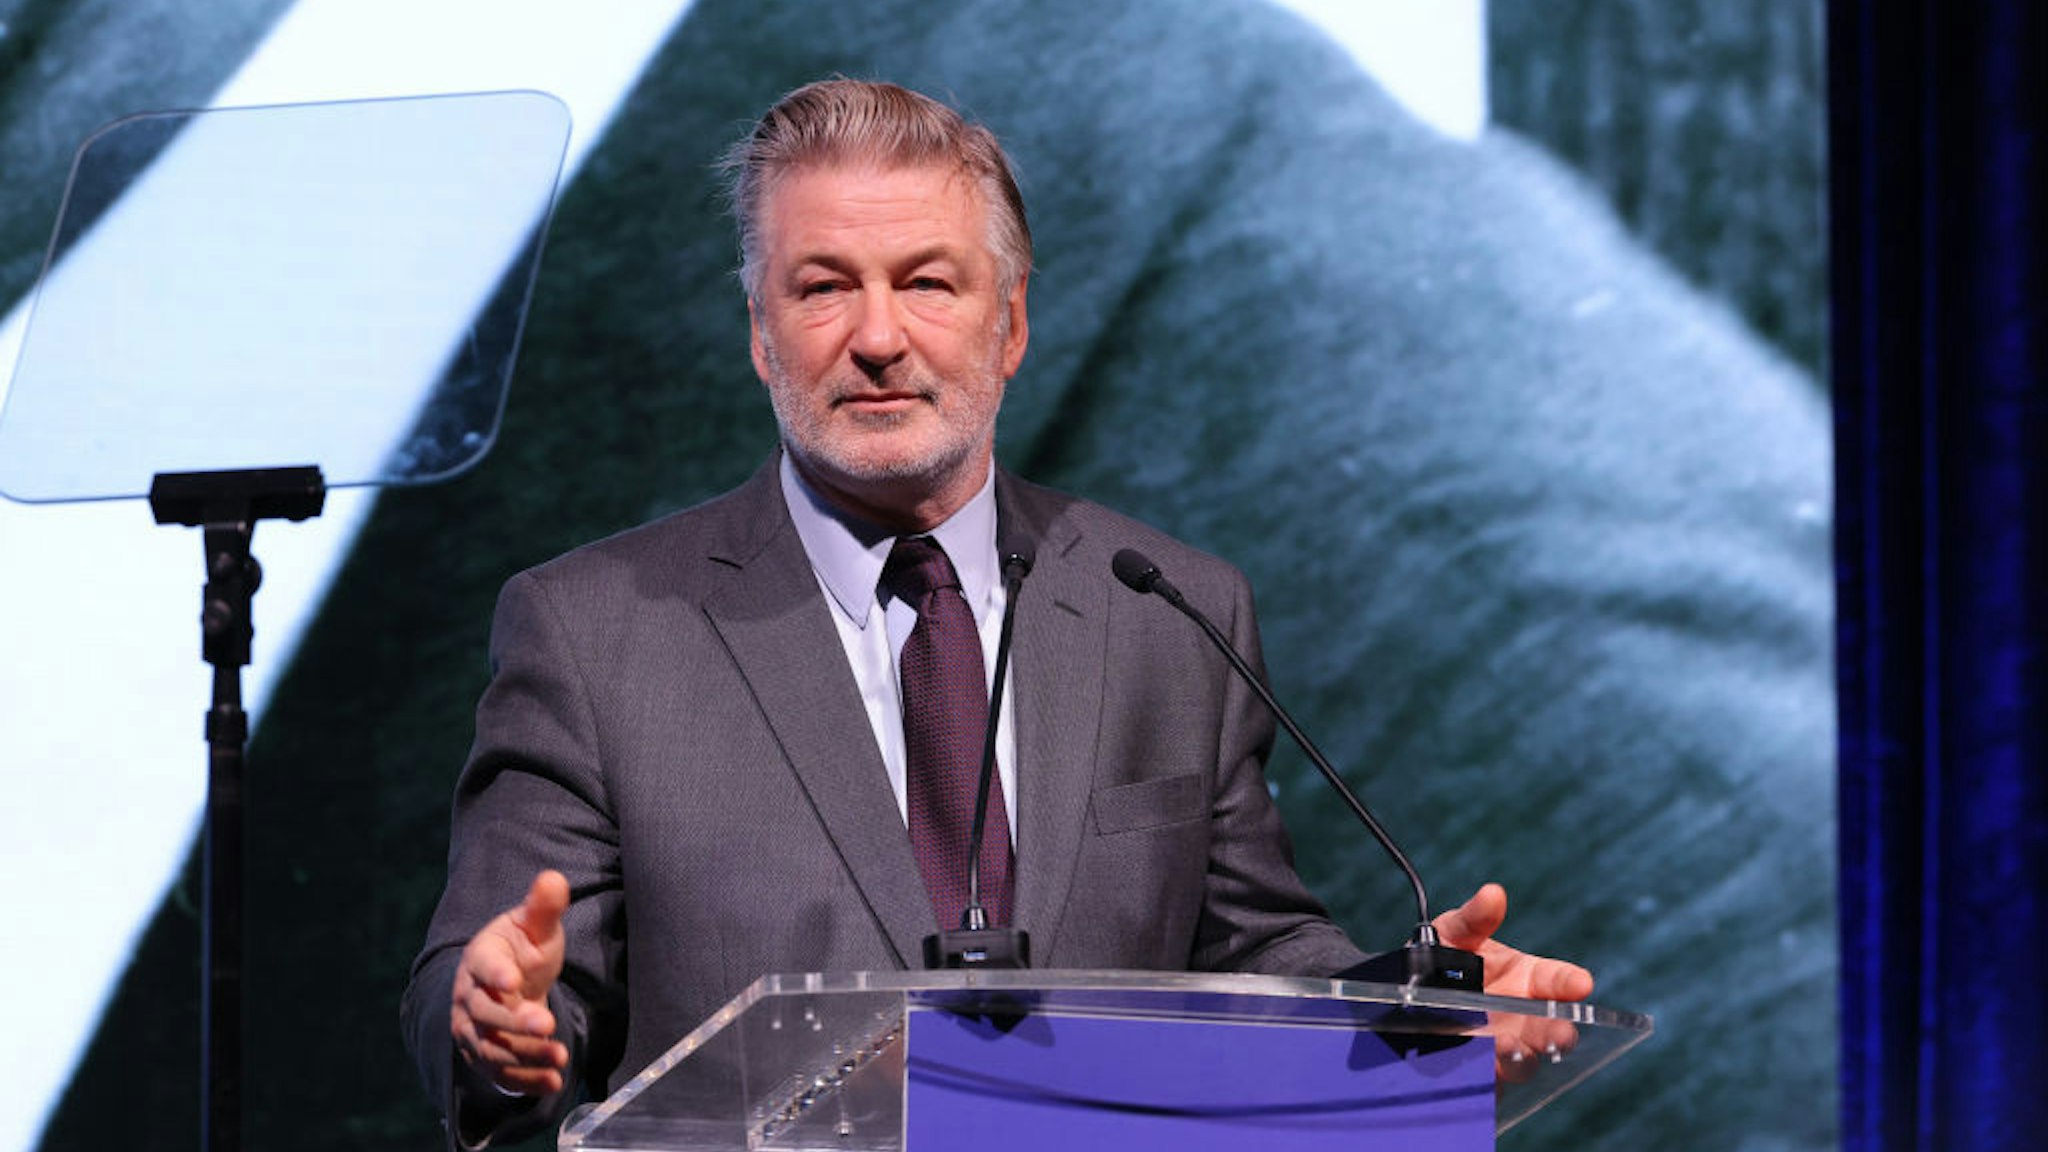 NEW YORK, NEW YORK - DECEMBER 06: Alec Baldwin speaks onstage at the 2022 Robert F. Kennedy Human Rights Ripple of Hope Gala at New York Hilton on December 06, 2022 in New York City. (Photo by Mike Coppola/Getty Images for 2022 Robert F. Kennedy Human Rights Ripple of Hope Gala)